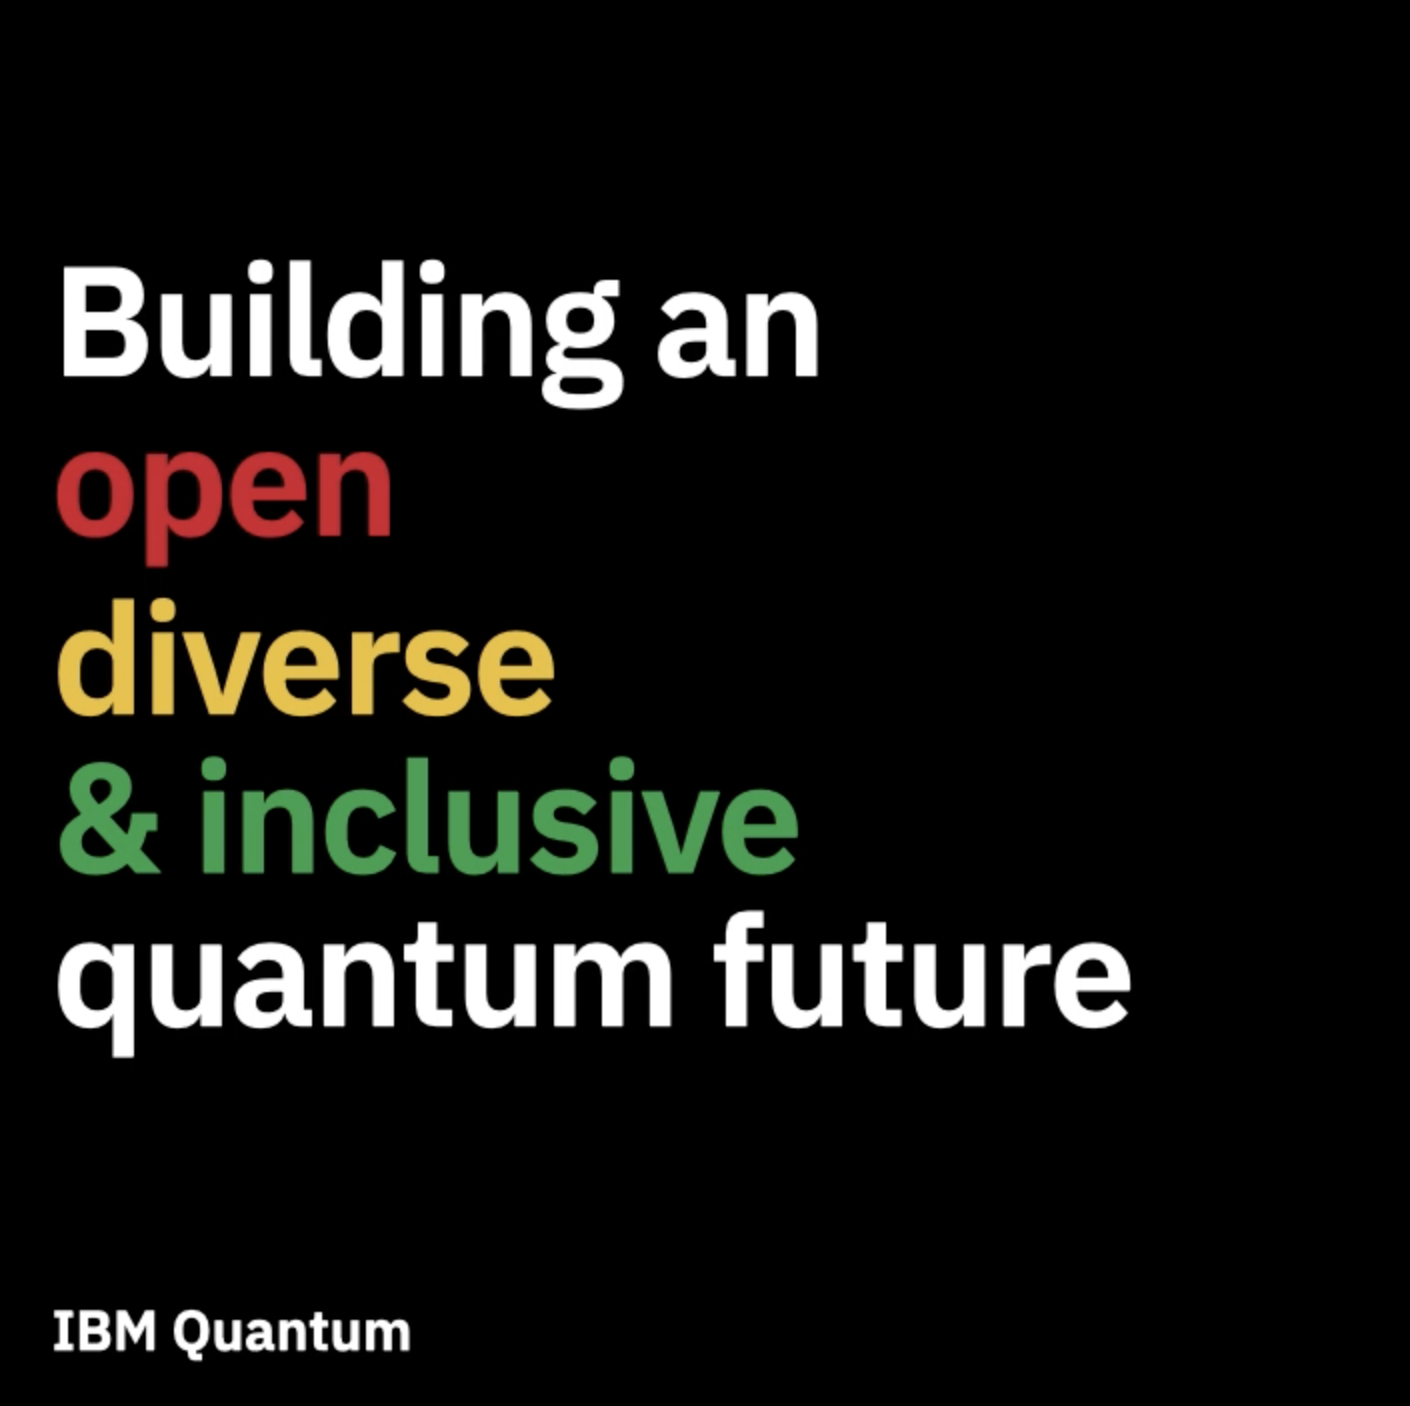 This is a photo of IBM's Quantum Center card